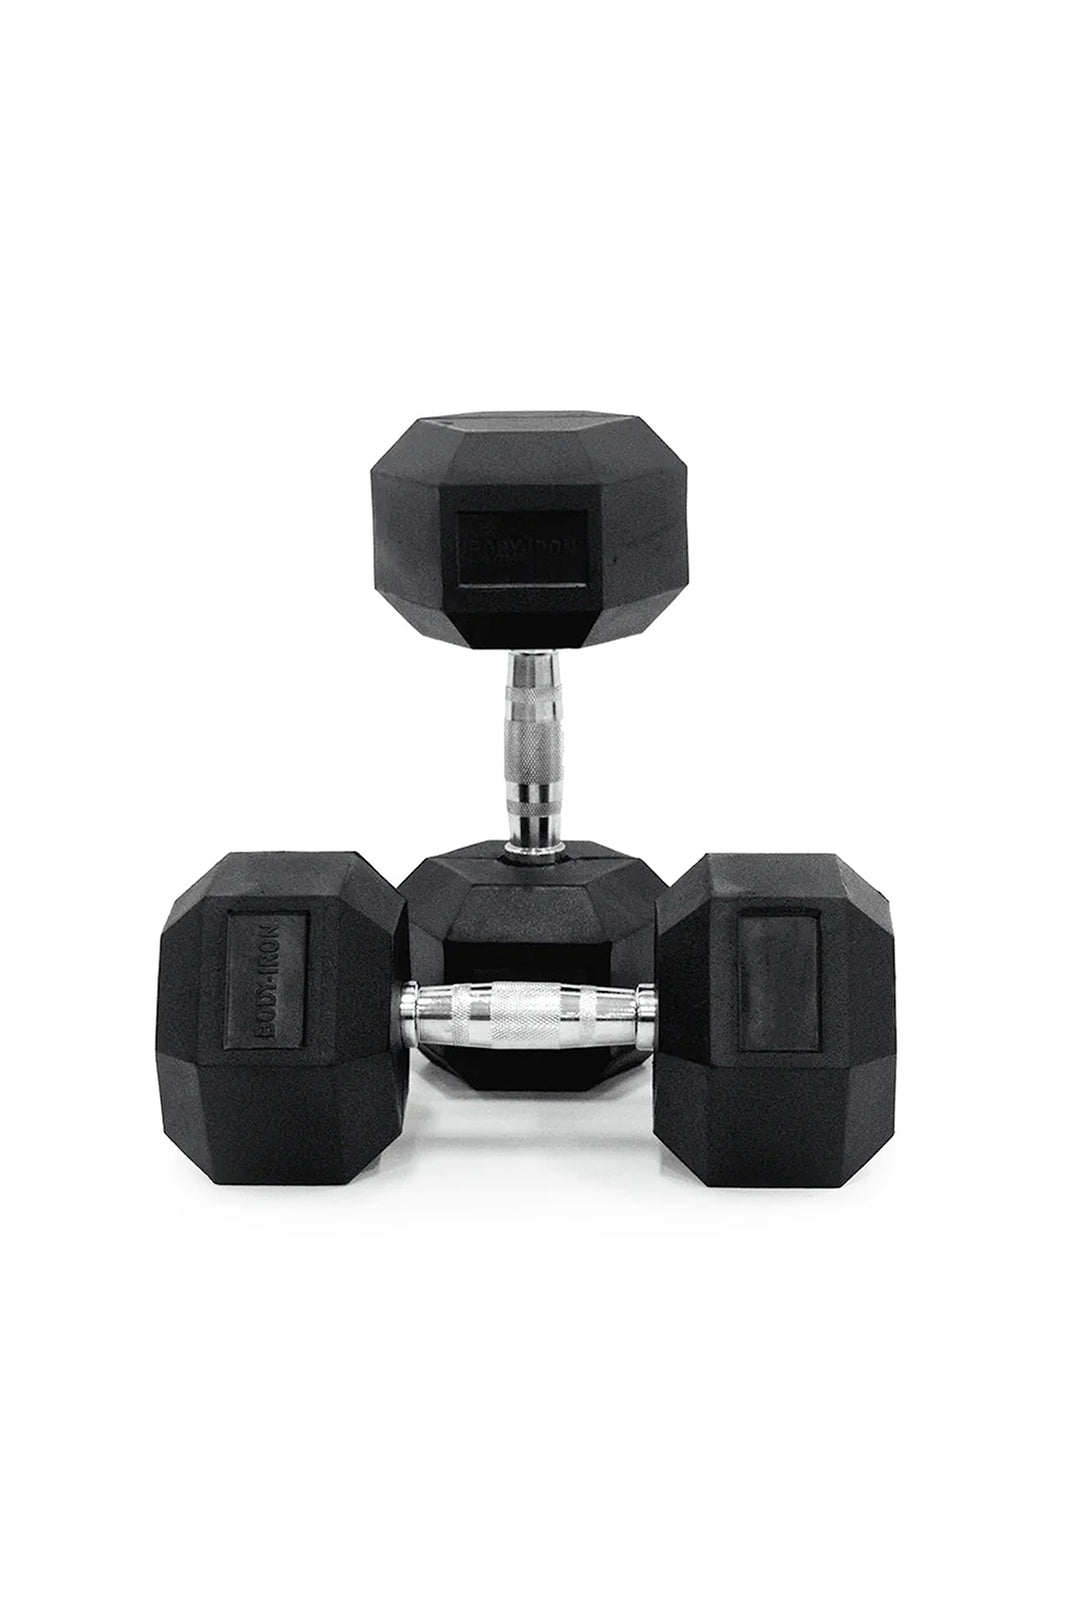 27.5kg Body Iron Commercial Rubber Hex Dumbbell Pair